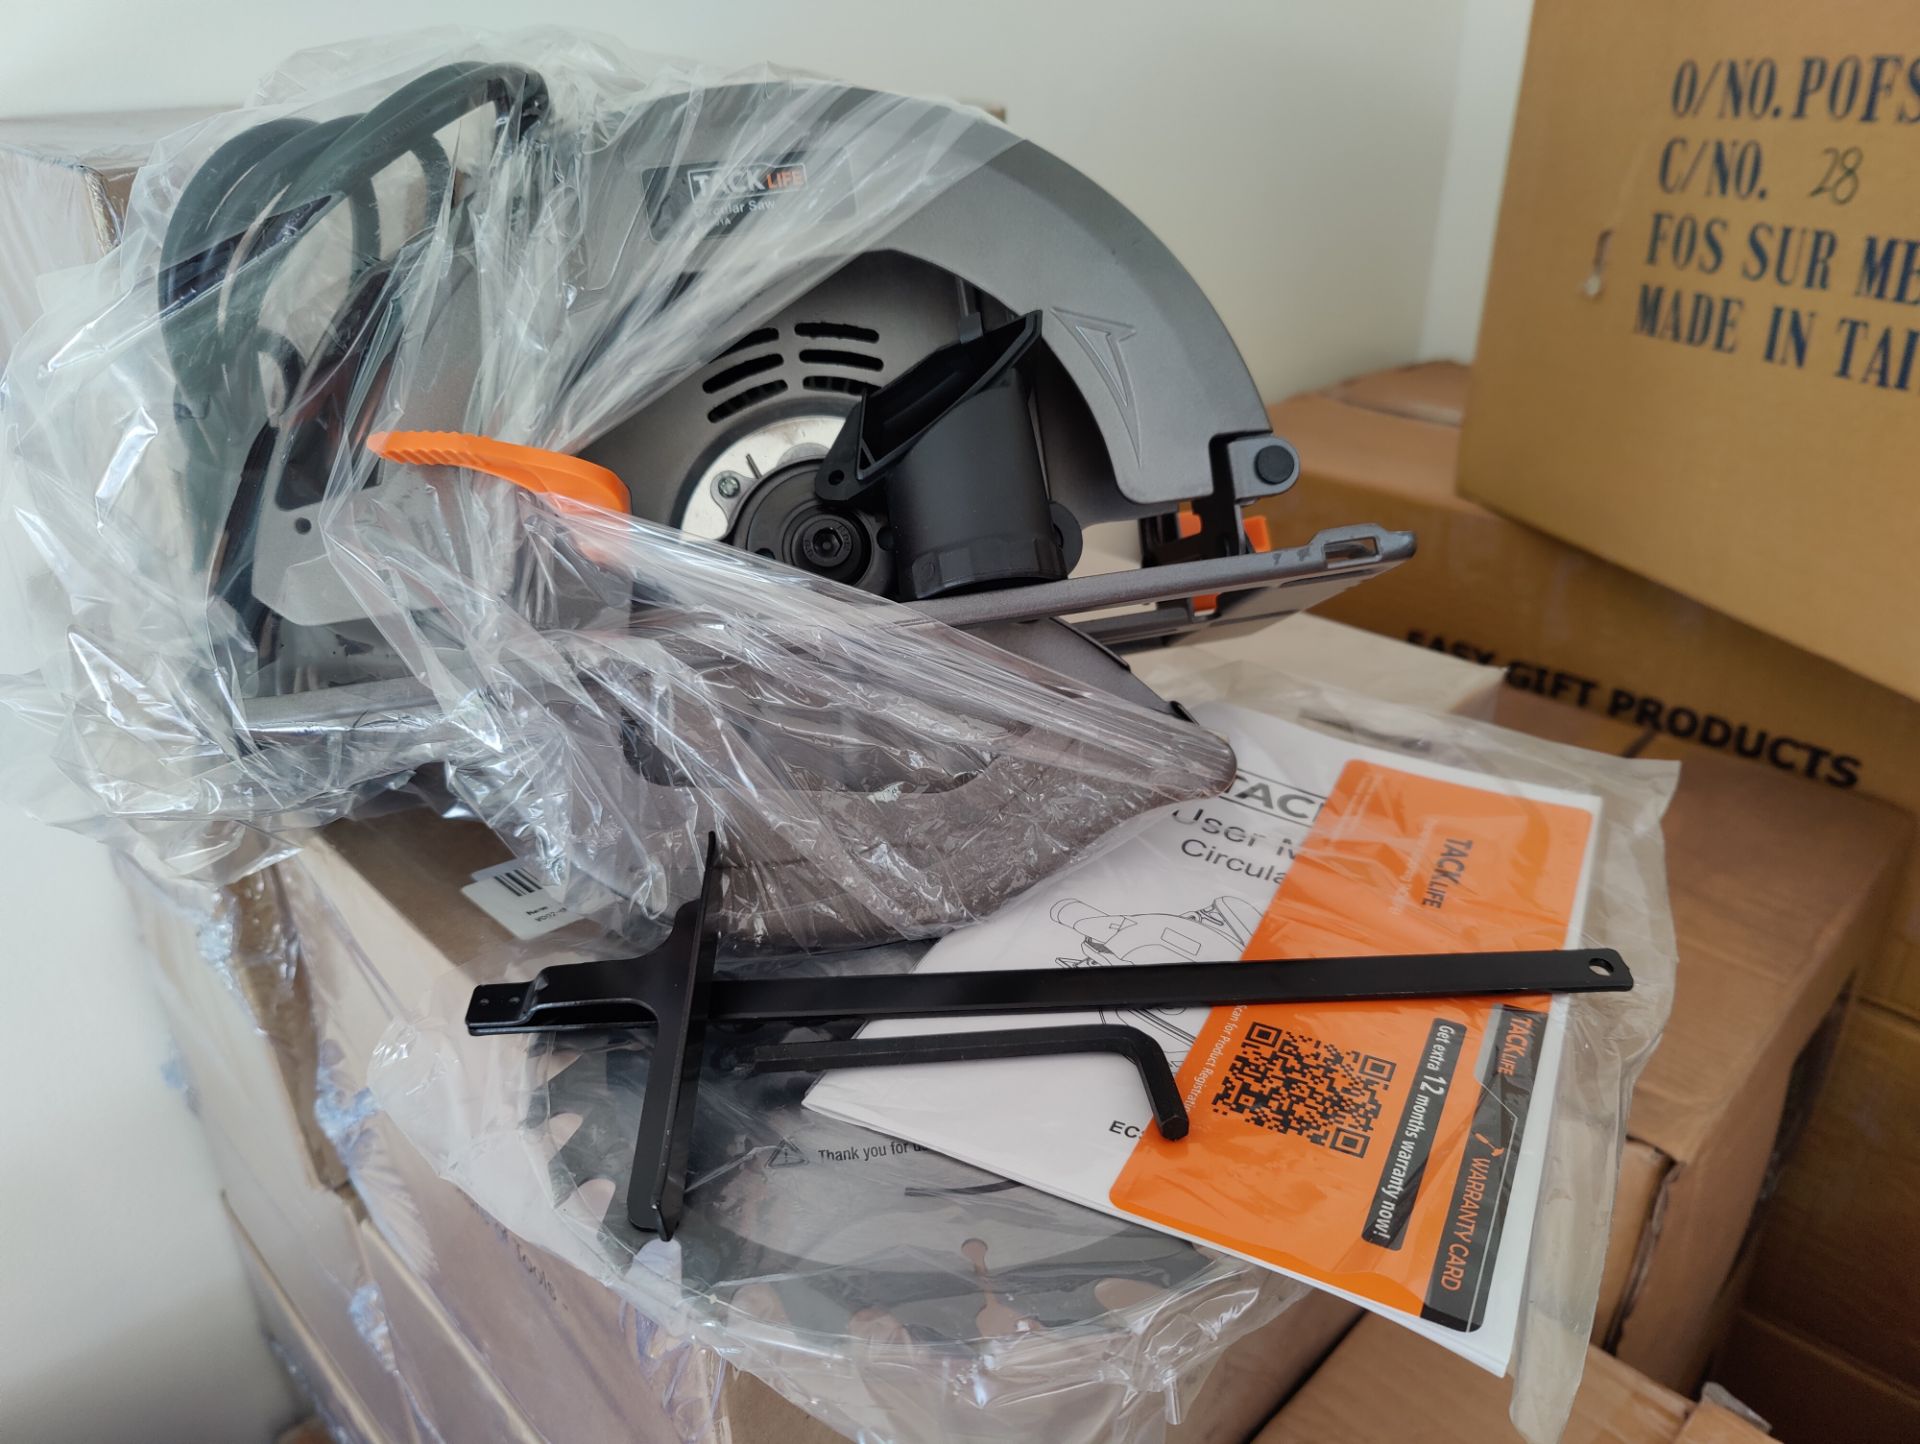 2 x Trade Lot New Boxed Tacklife Electric Circular Saw,1500W, 5000 RPM With Bevel Cuts 2-3/5' - Image 3 of 4